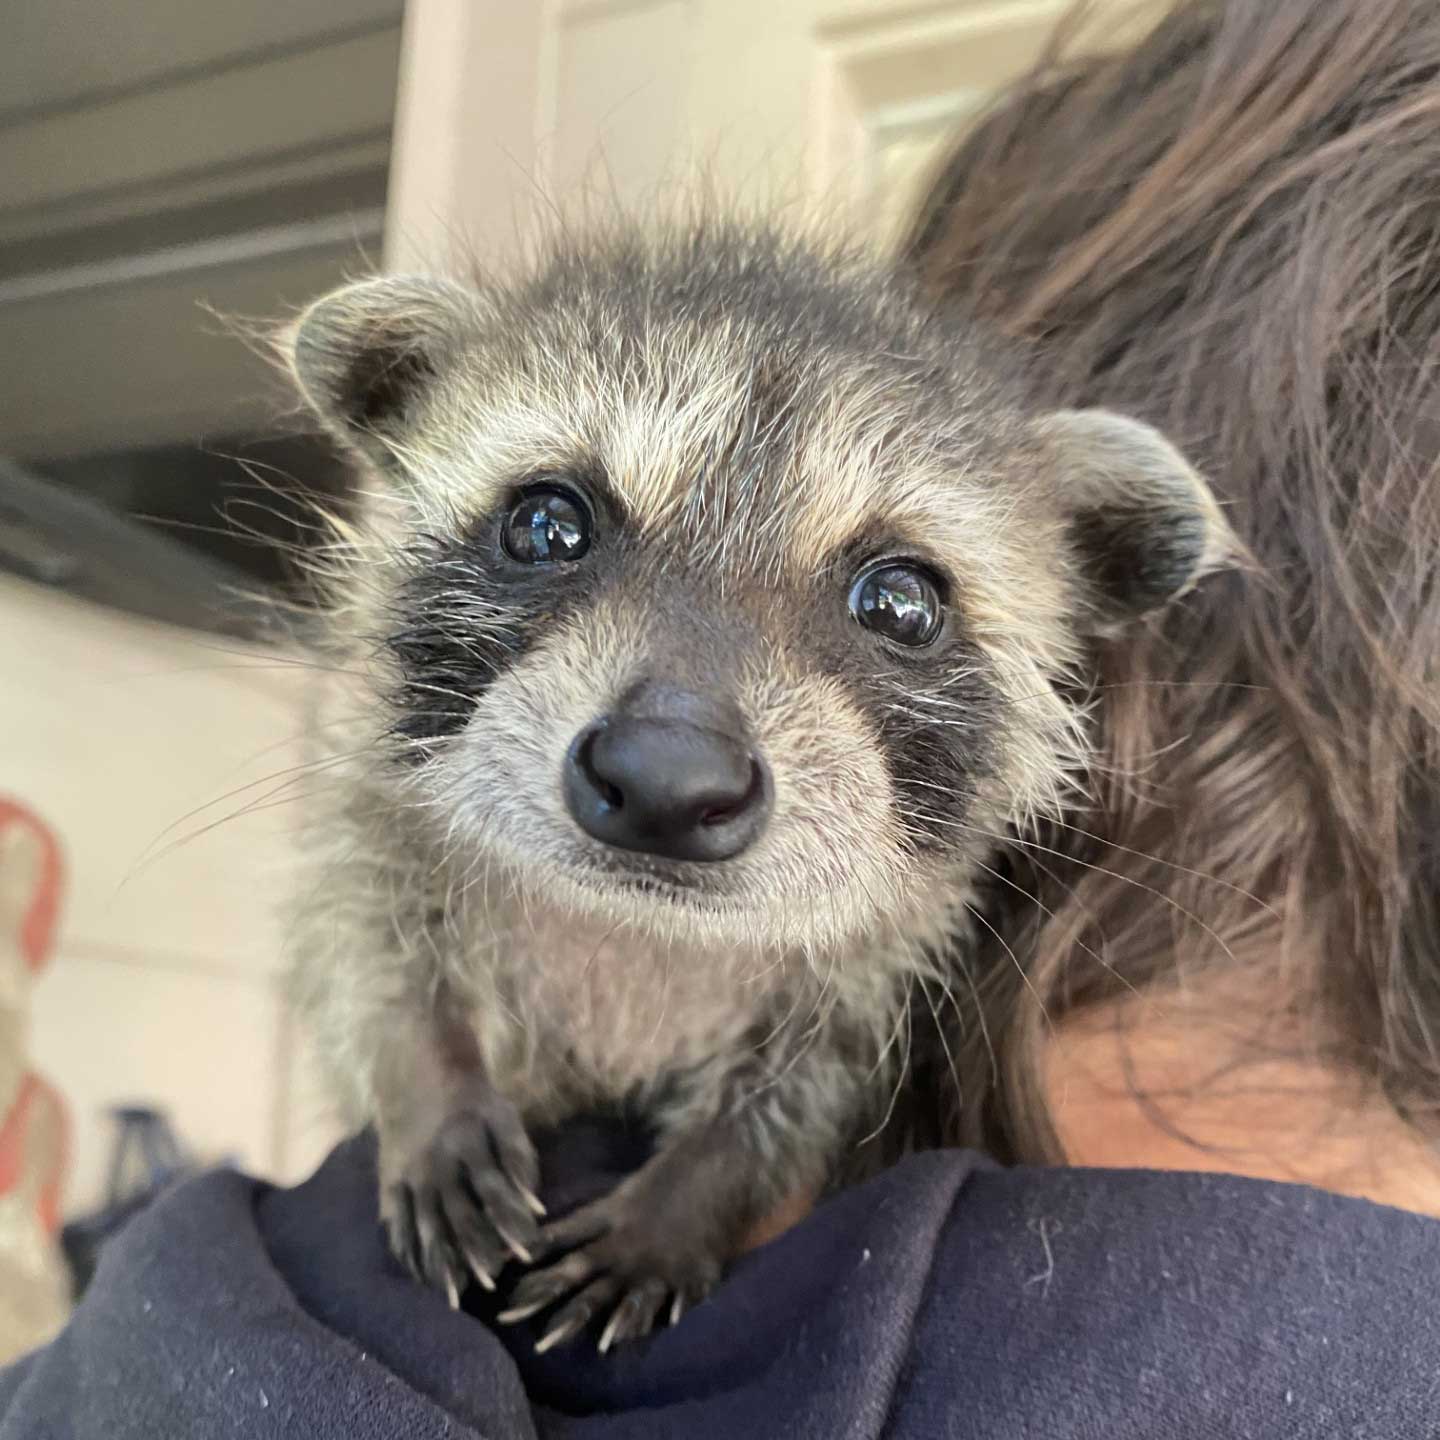 A baby raccoon being gently held on someone's shoulder, symbolizing compassionate and humane animal control. The raccoon's curious eyes and relaxed posture highlight the ethical and caring approach to wildlife handling.